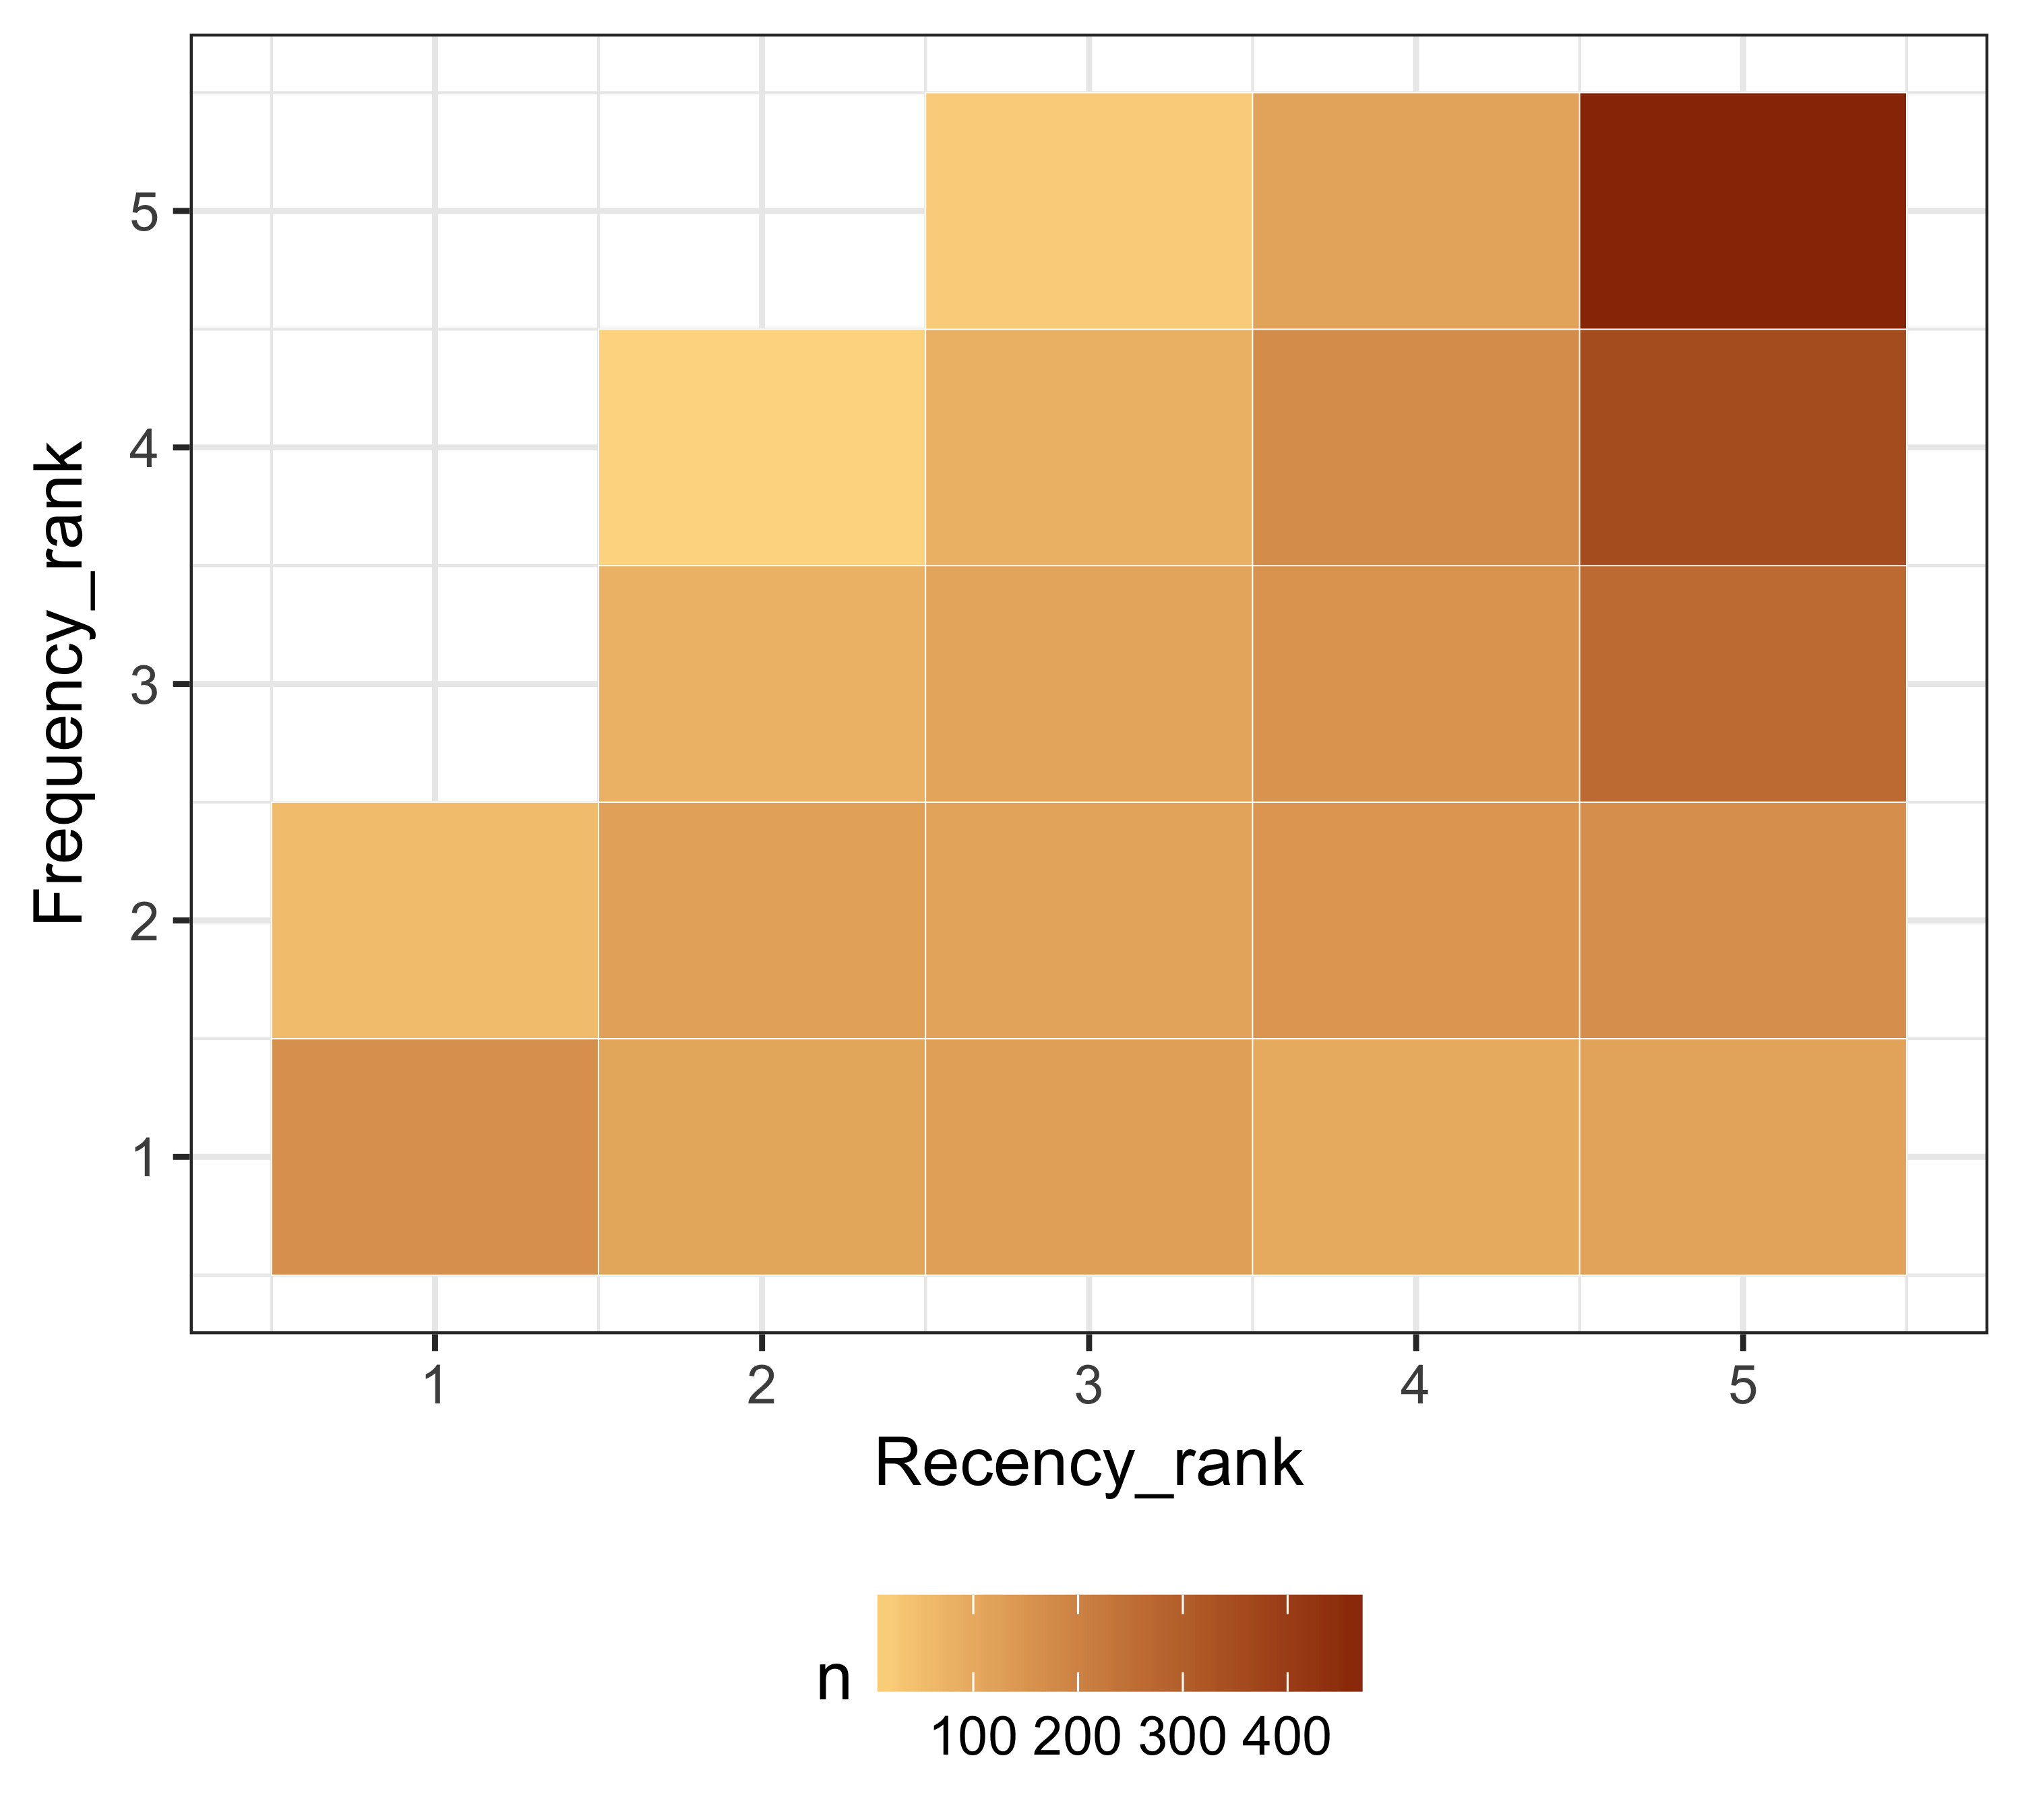 Recency and frequency rank along with giving